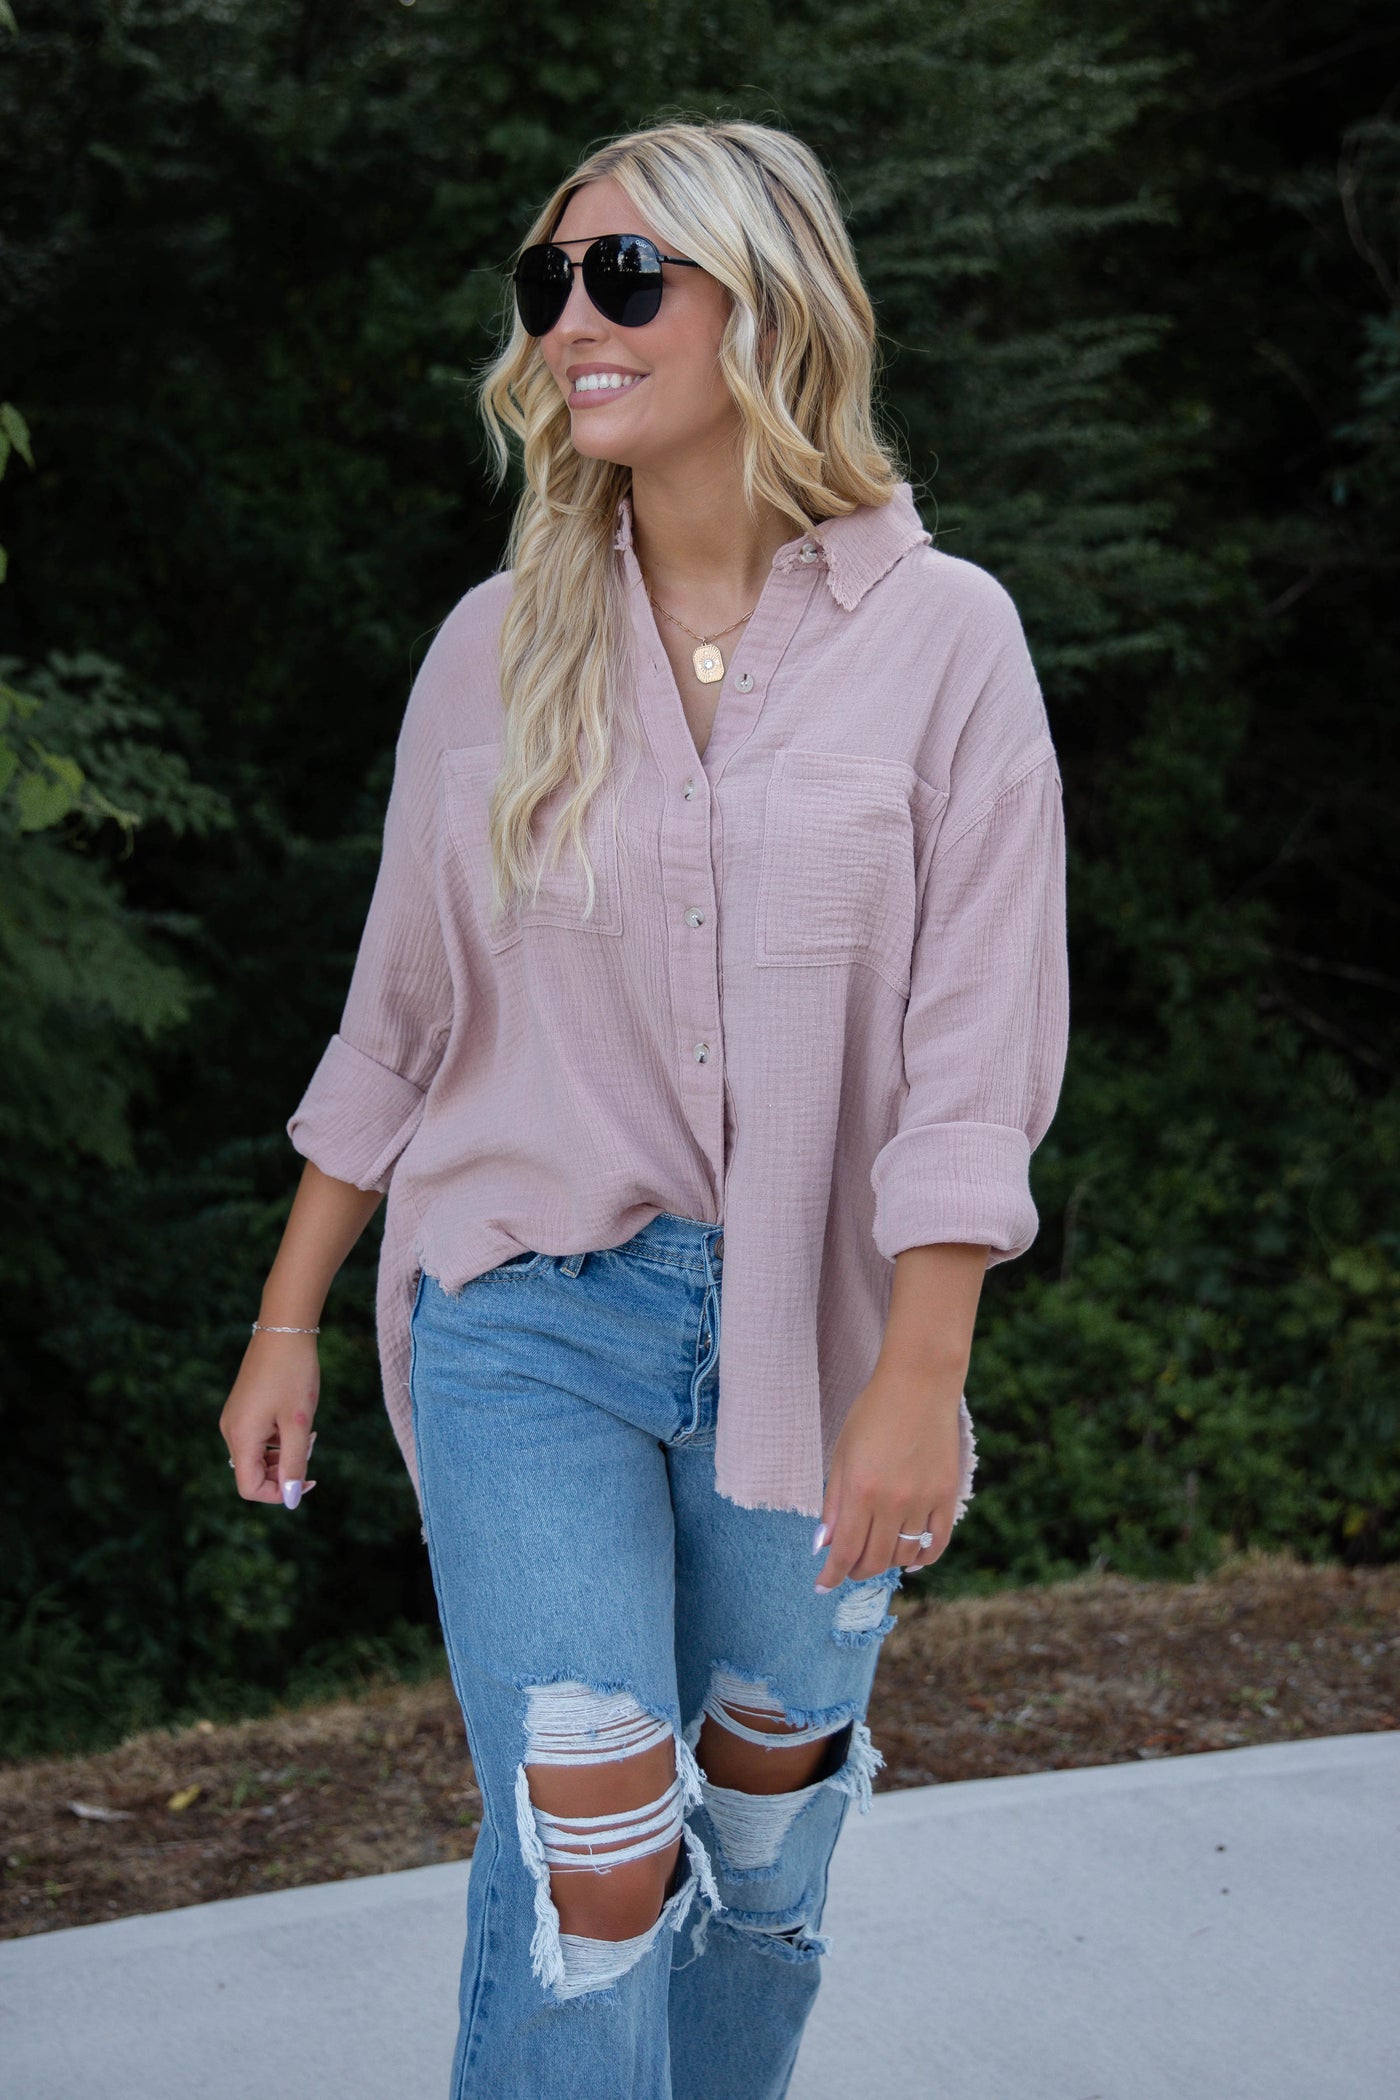 Women's Blush Button Down- Cotton Button Down Top- Casual Top With Pockets